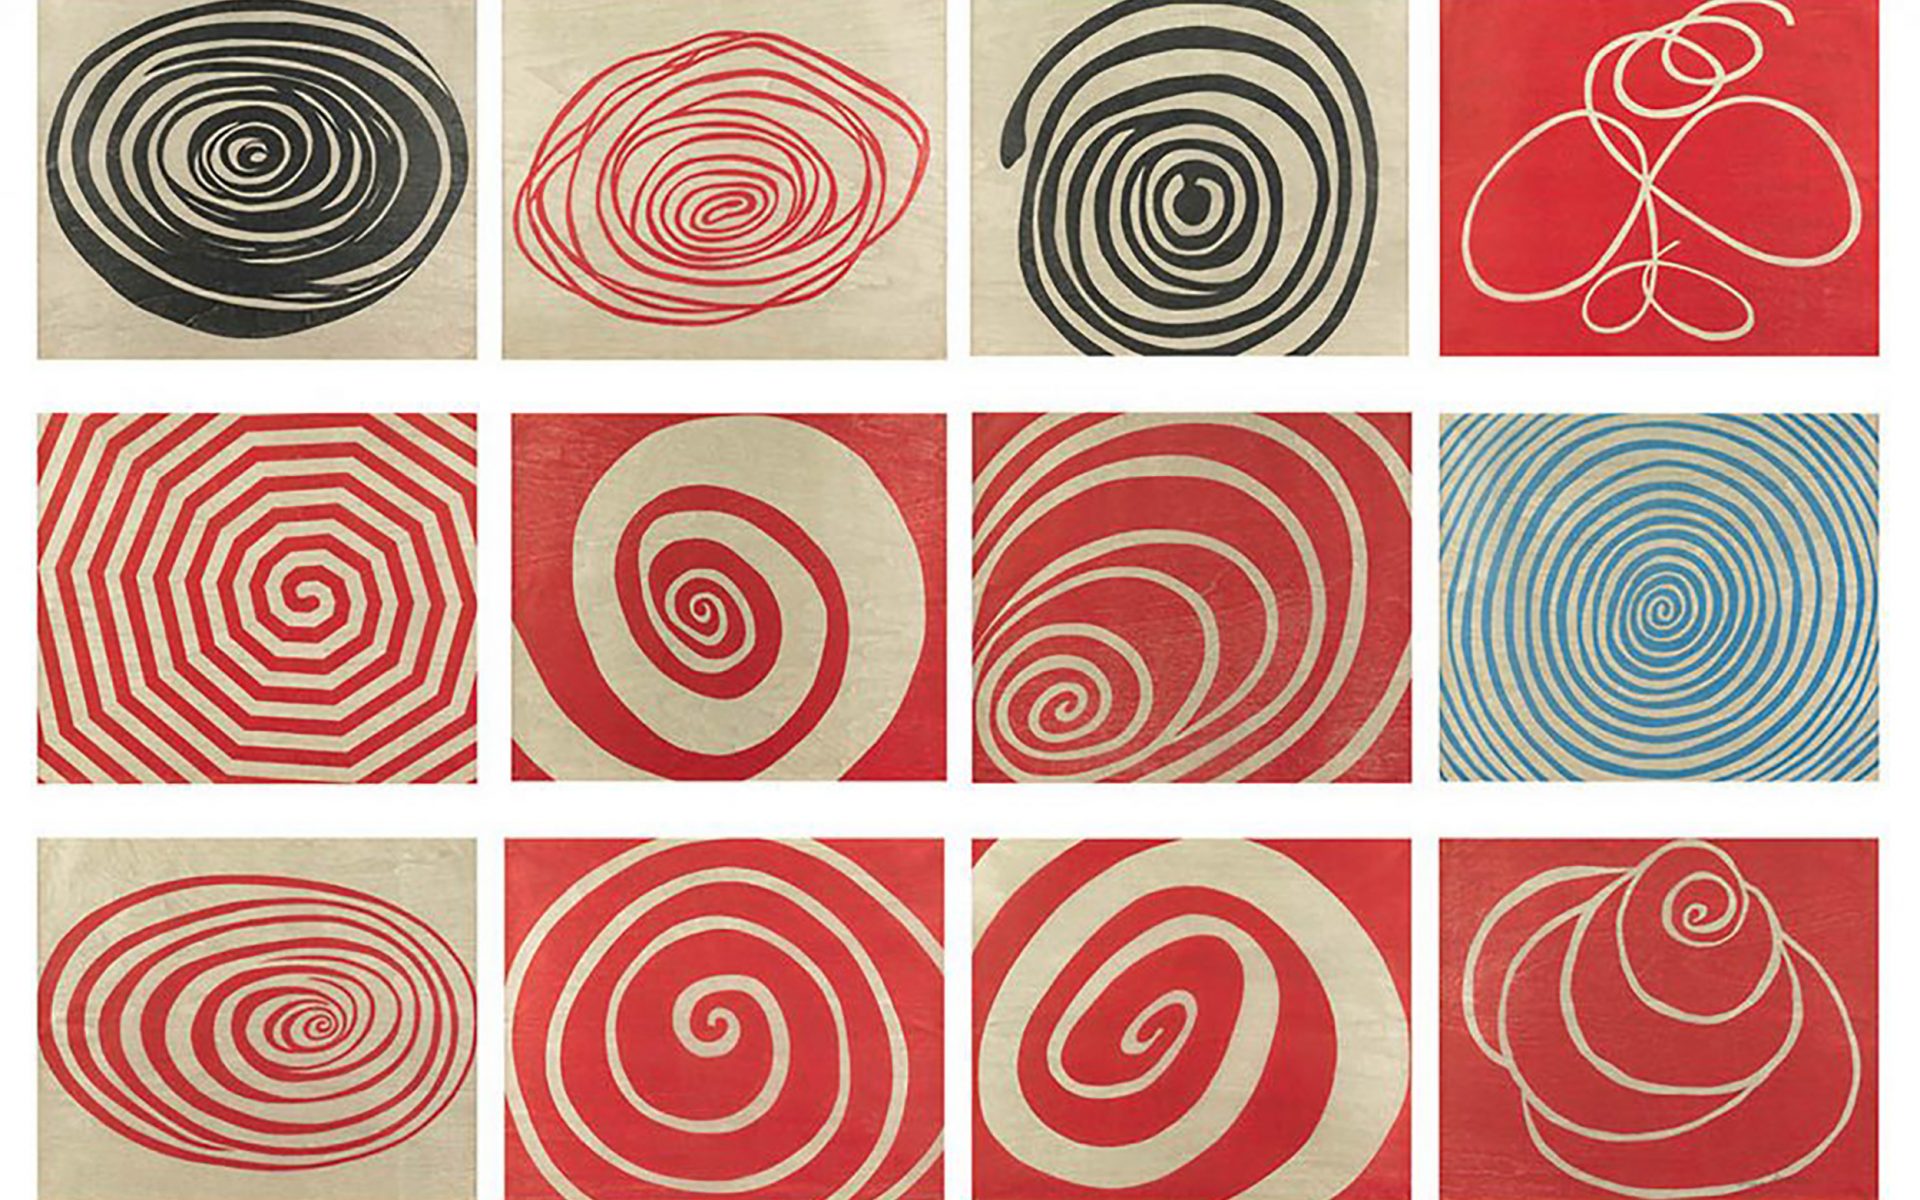 Louise Bourgeois dies at 98; revered artist's work was a 'form of